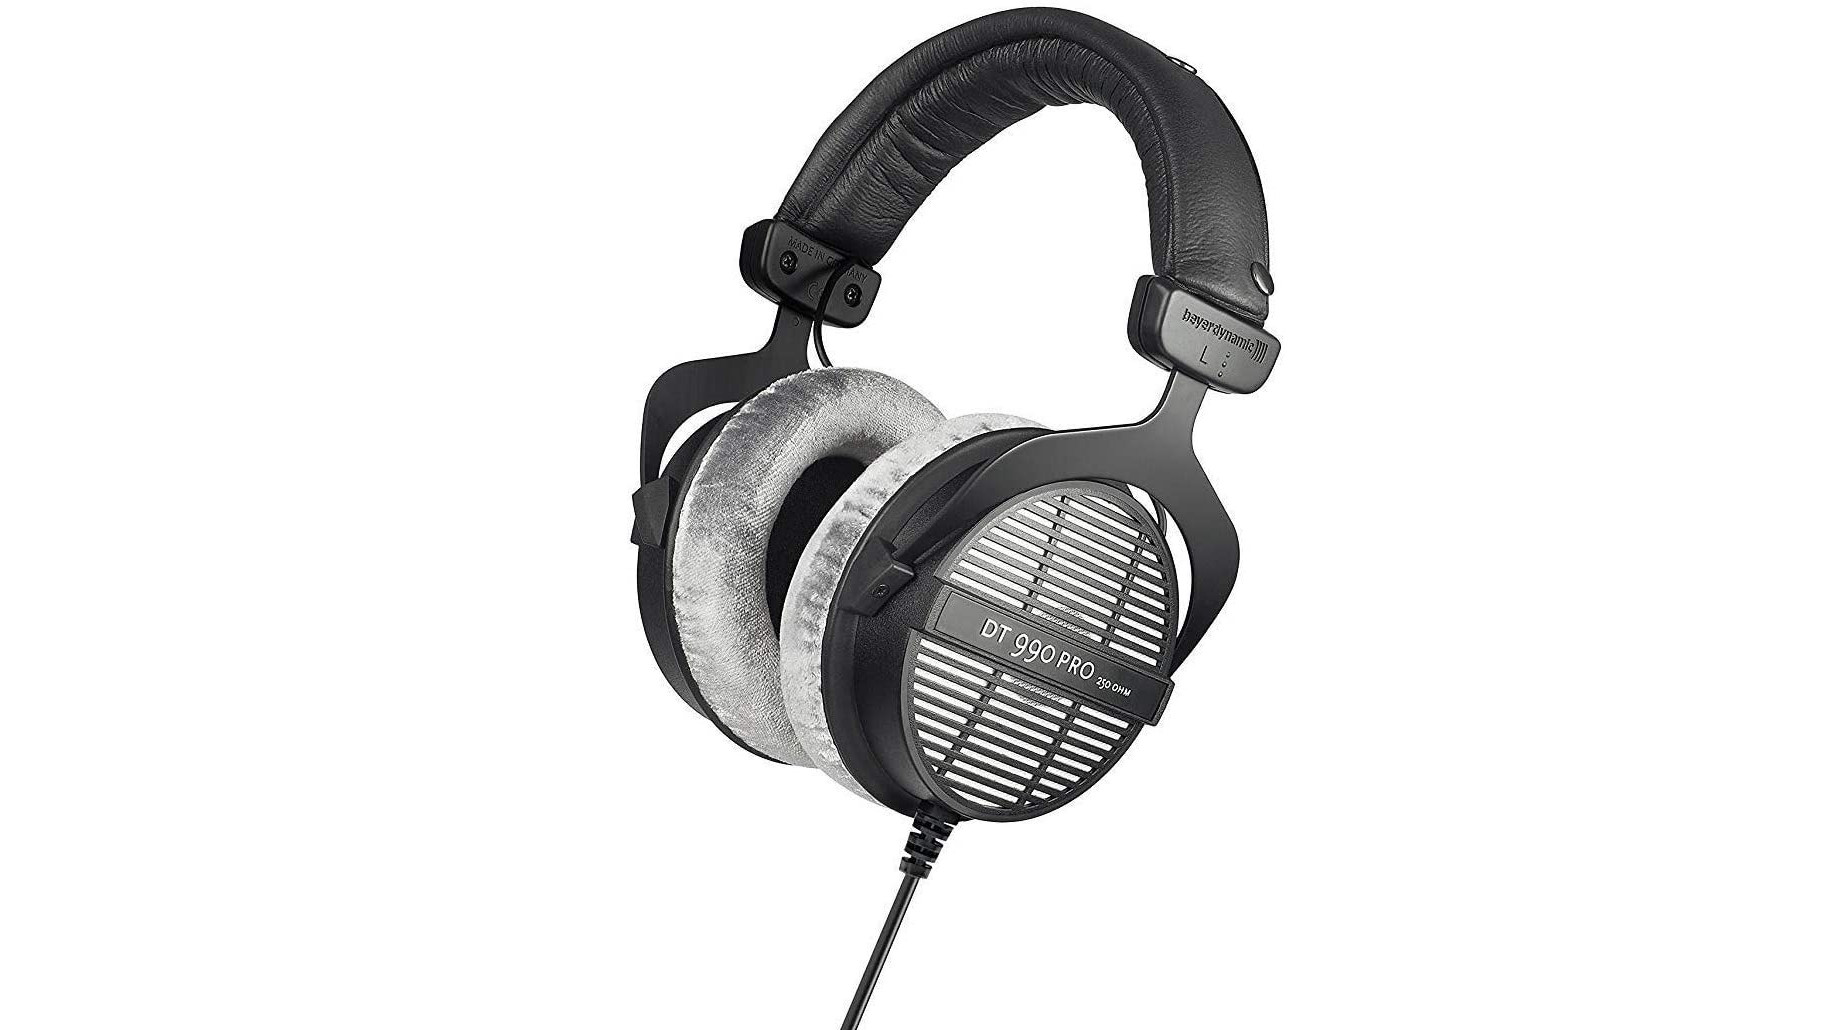 The Beyerdynamic DT 990 Pro over-ear headphones in black with white cushioning